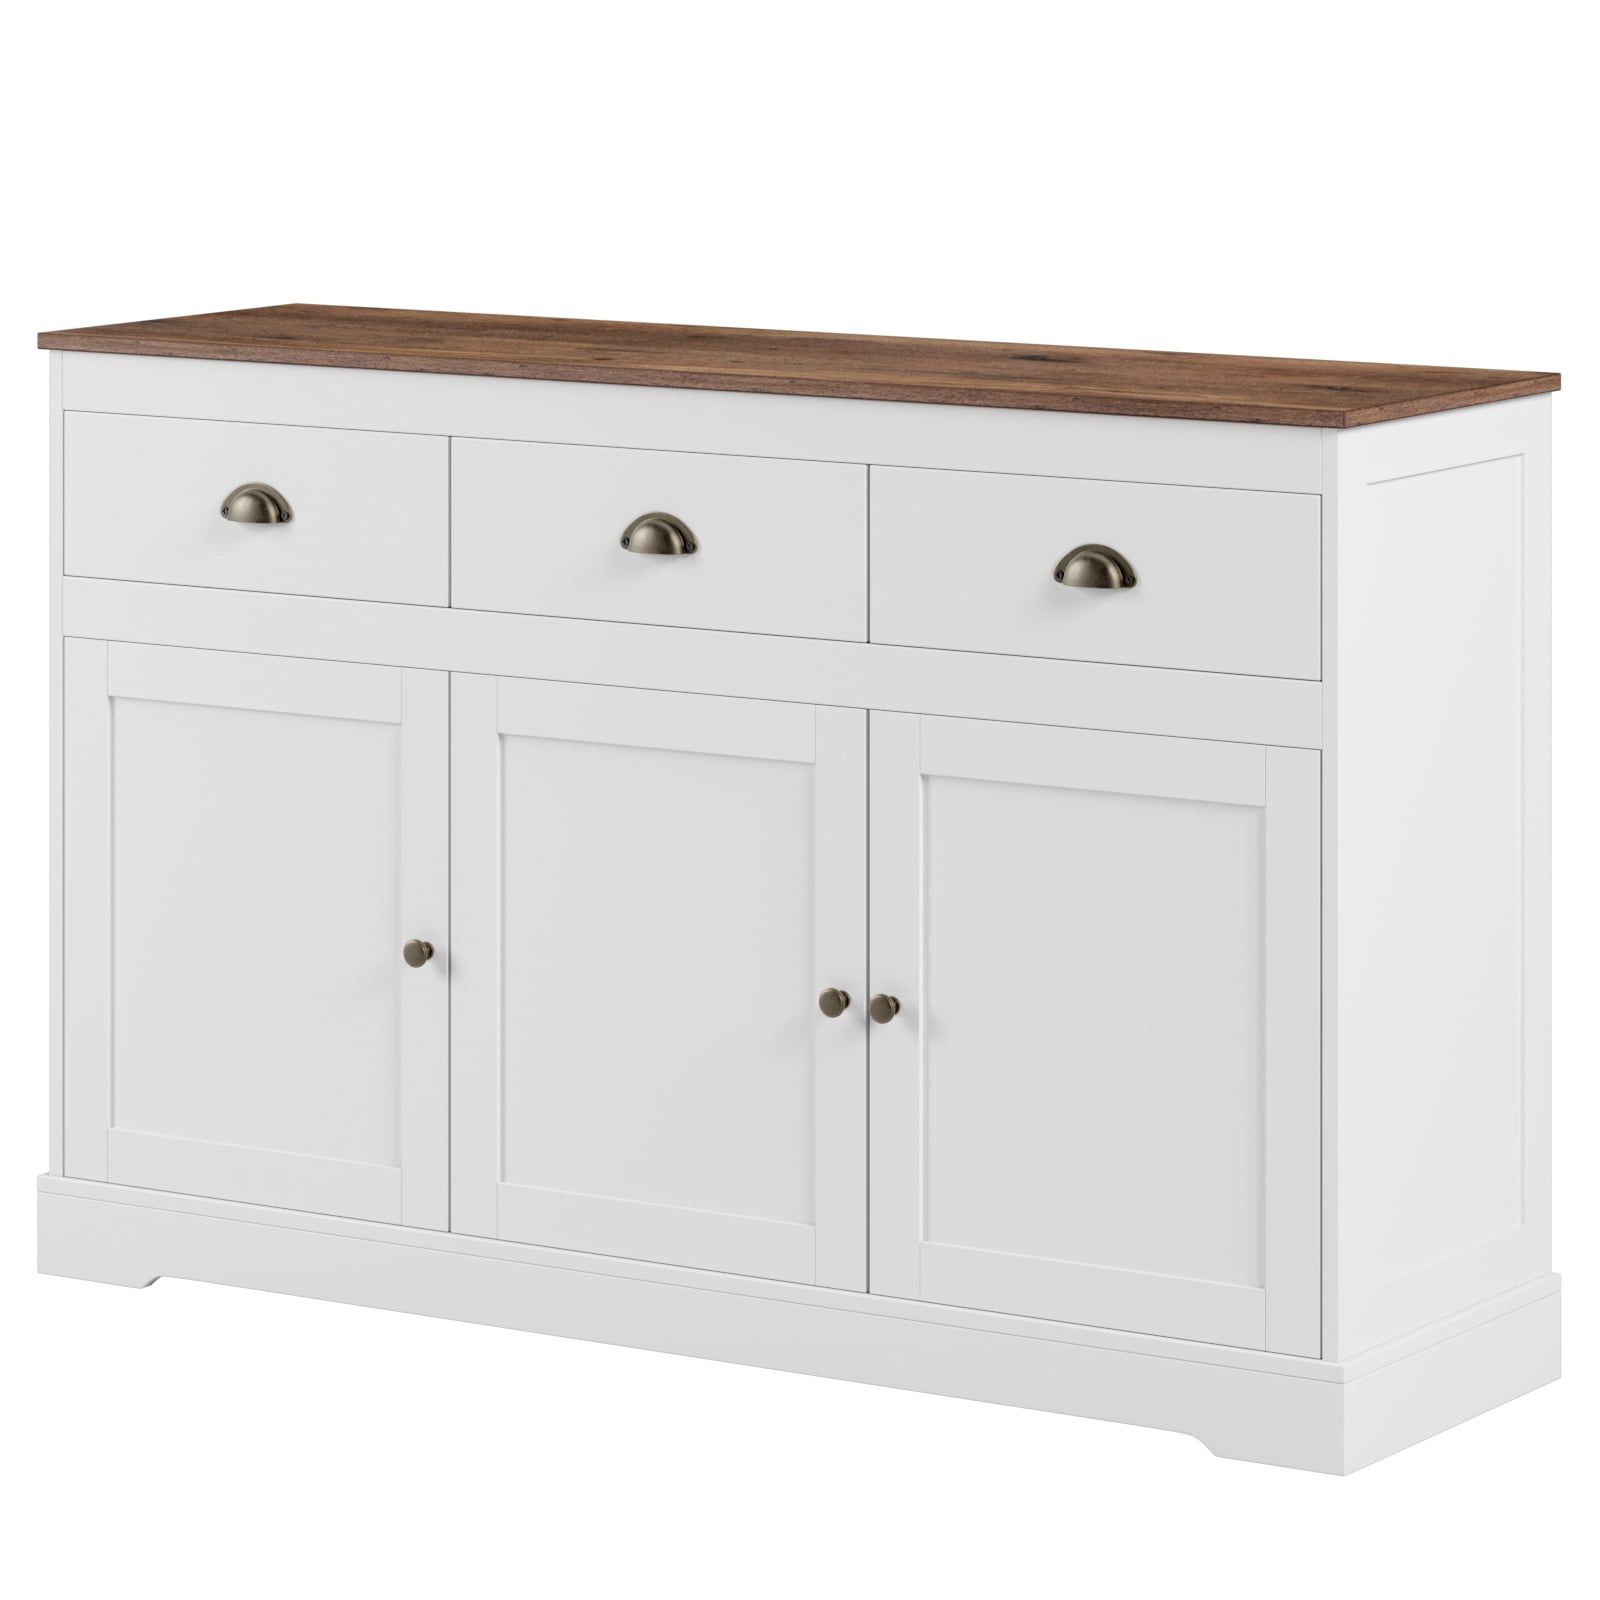 Homfa Sideboard Storage Cabinet With 3 Drawers & 3 Doors, 53.54'' Wide Buffet  Cabinet For Dining Room, White – Walmart In 2017 3 Drawers Sideboards Storage Cabinet (Photo 10 of 10)